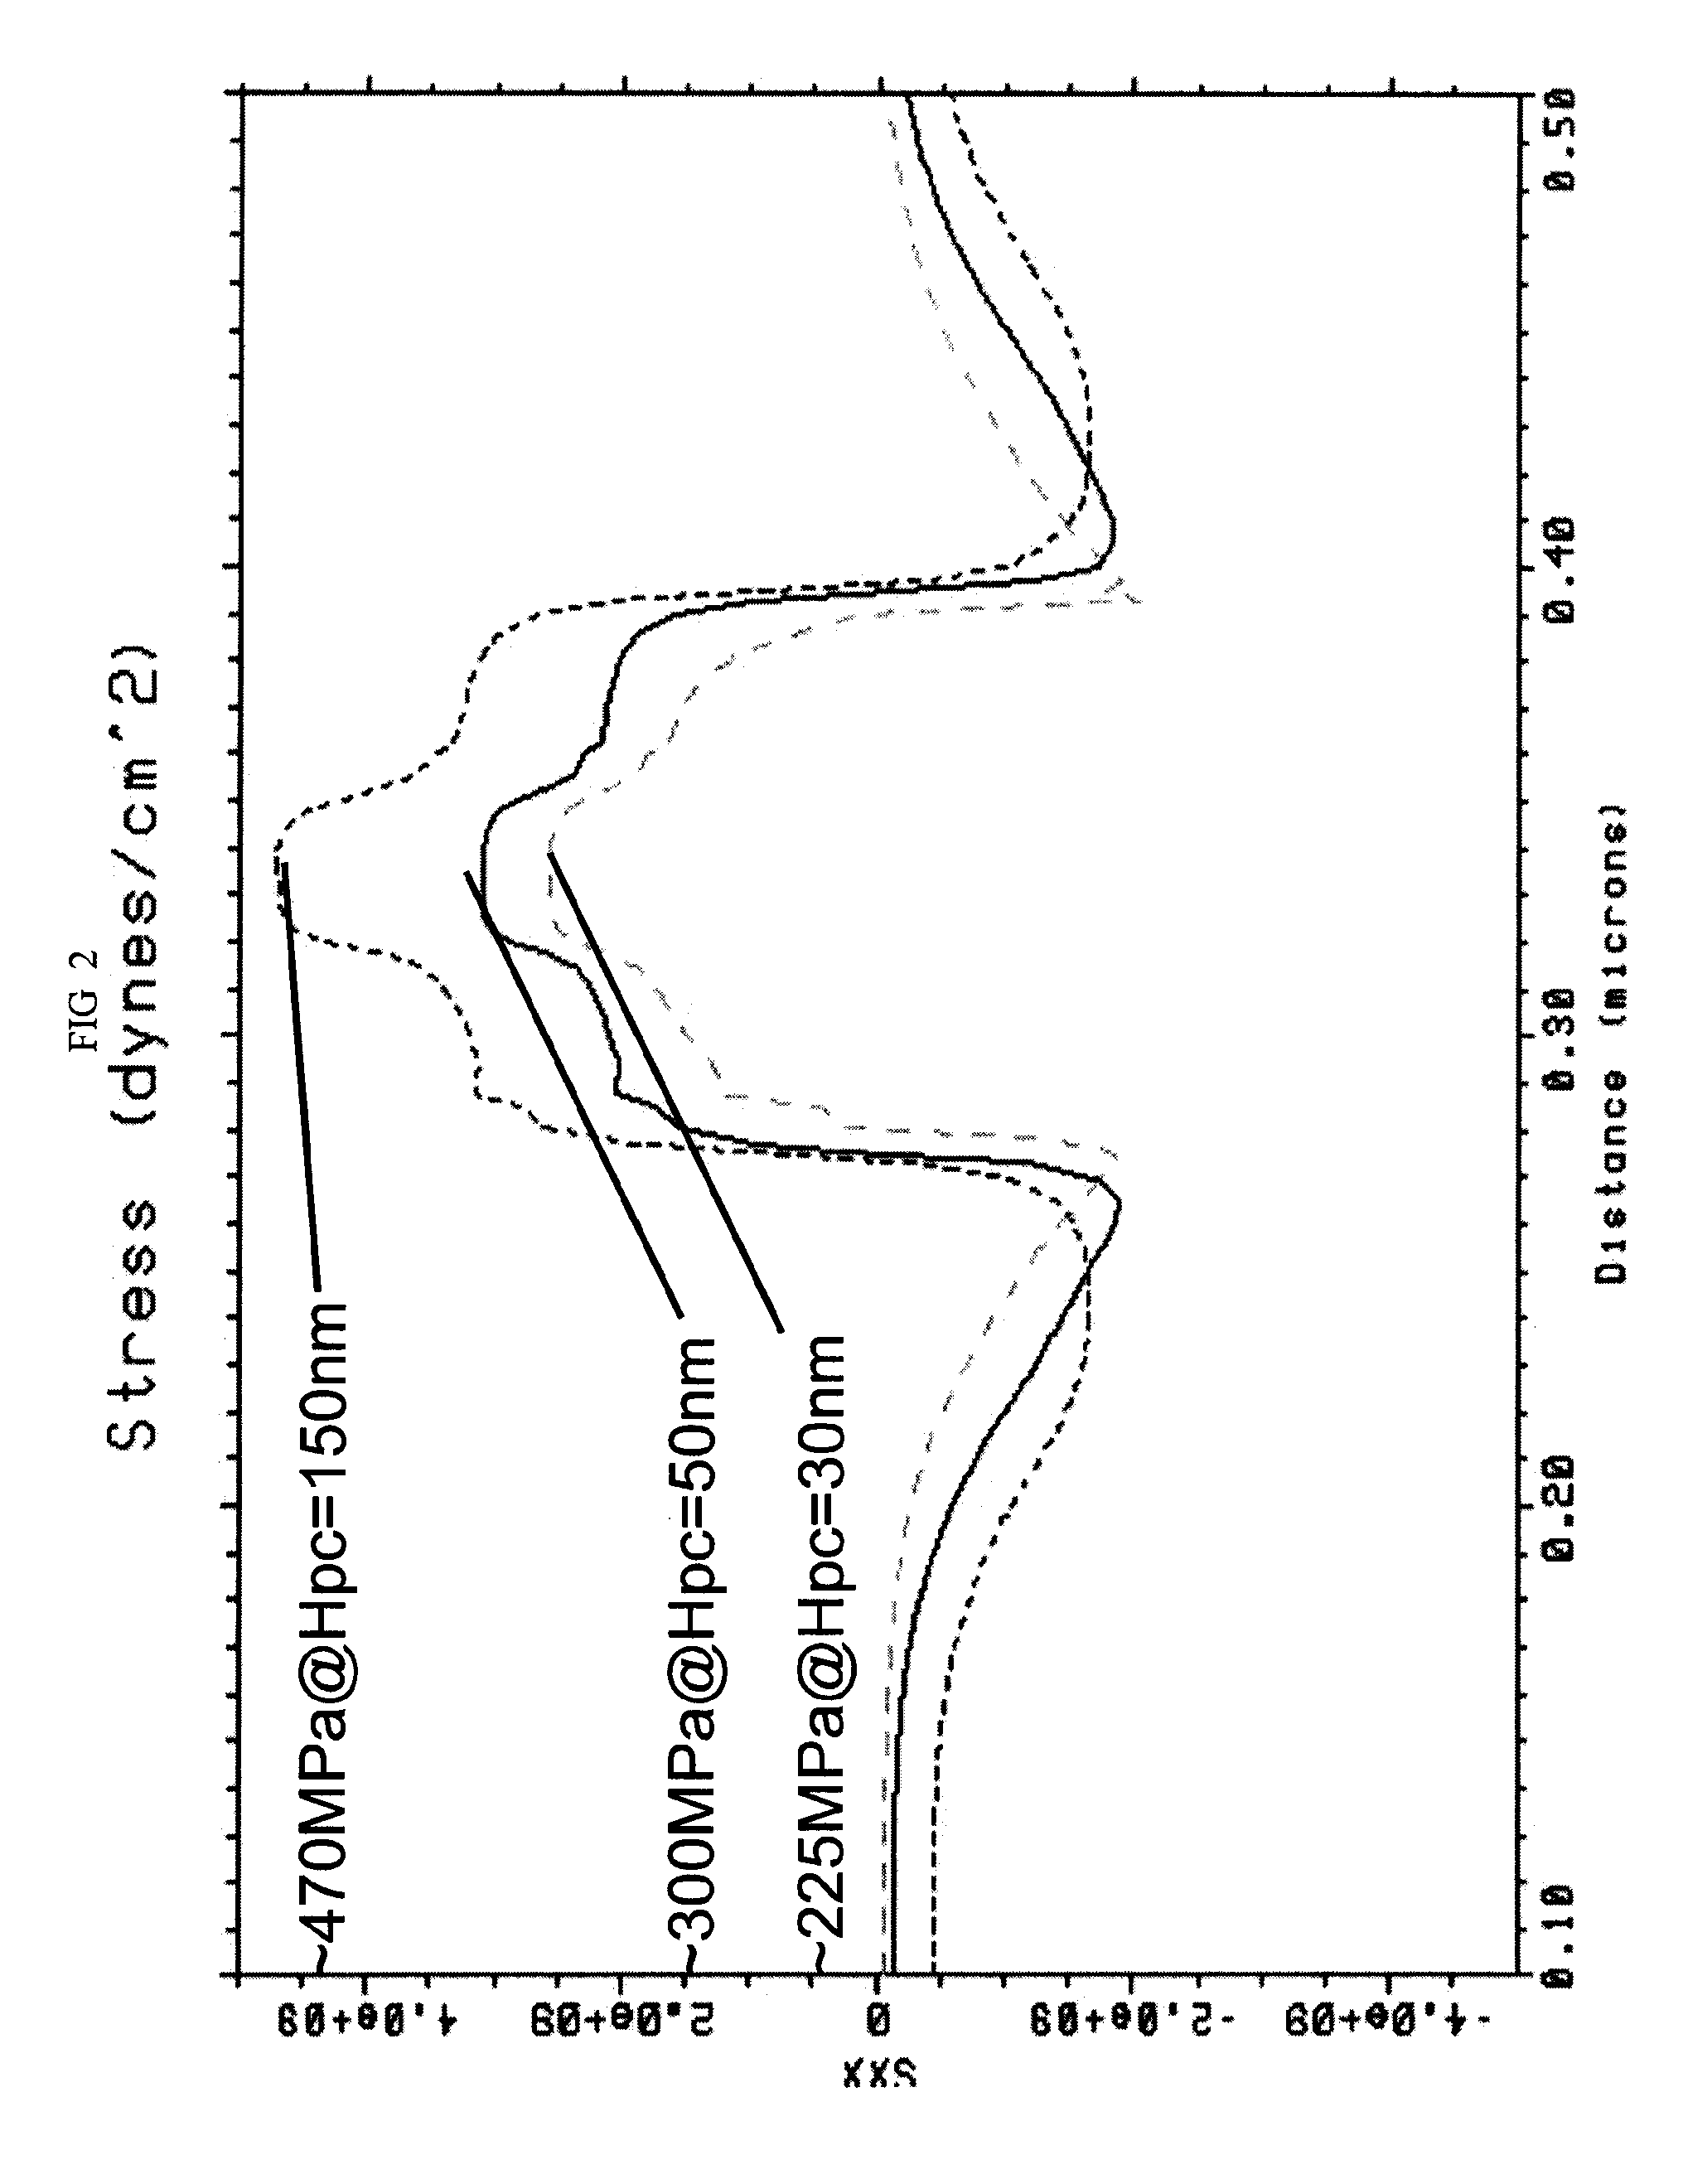 Structure and method to enhance stress in a channel of CMOS devices using a thin gate